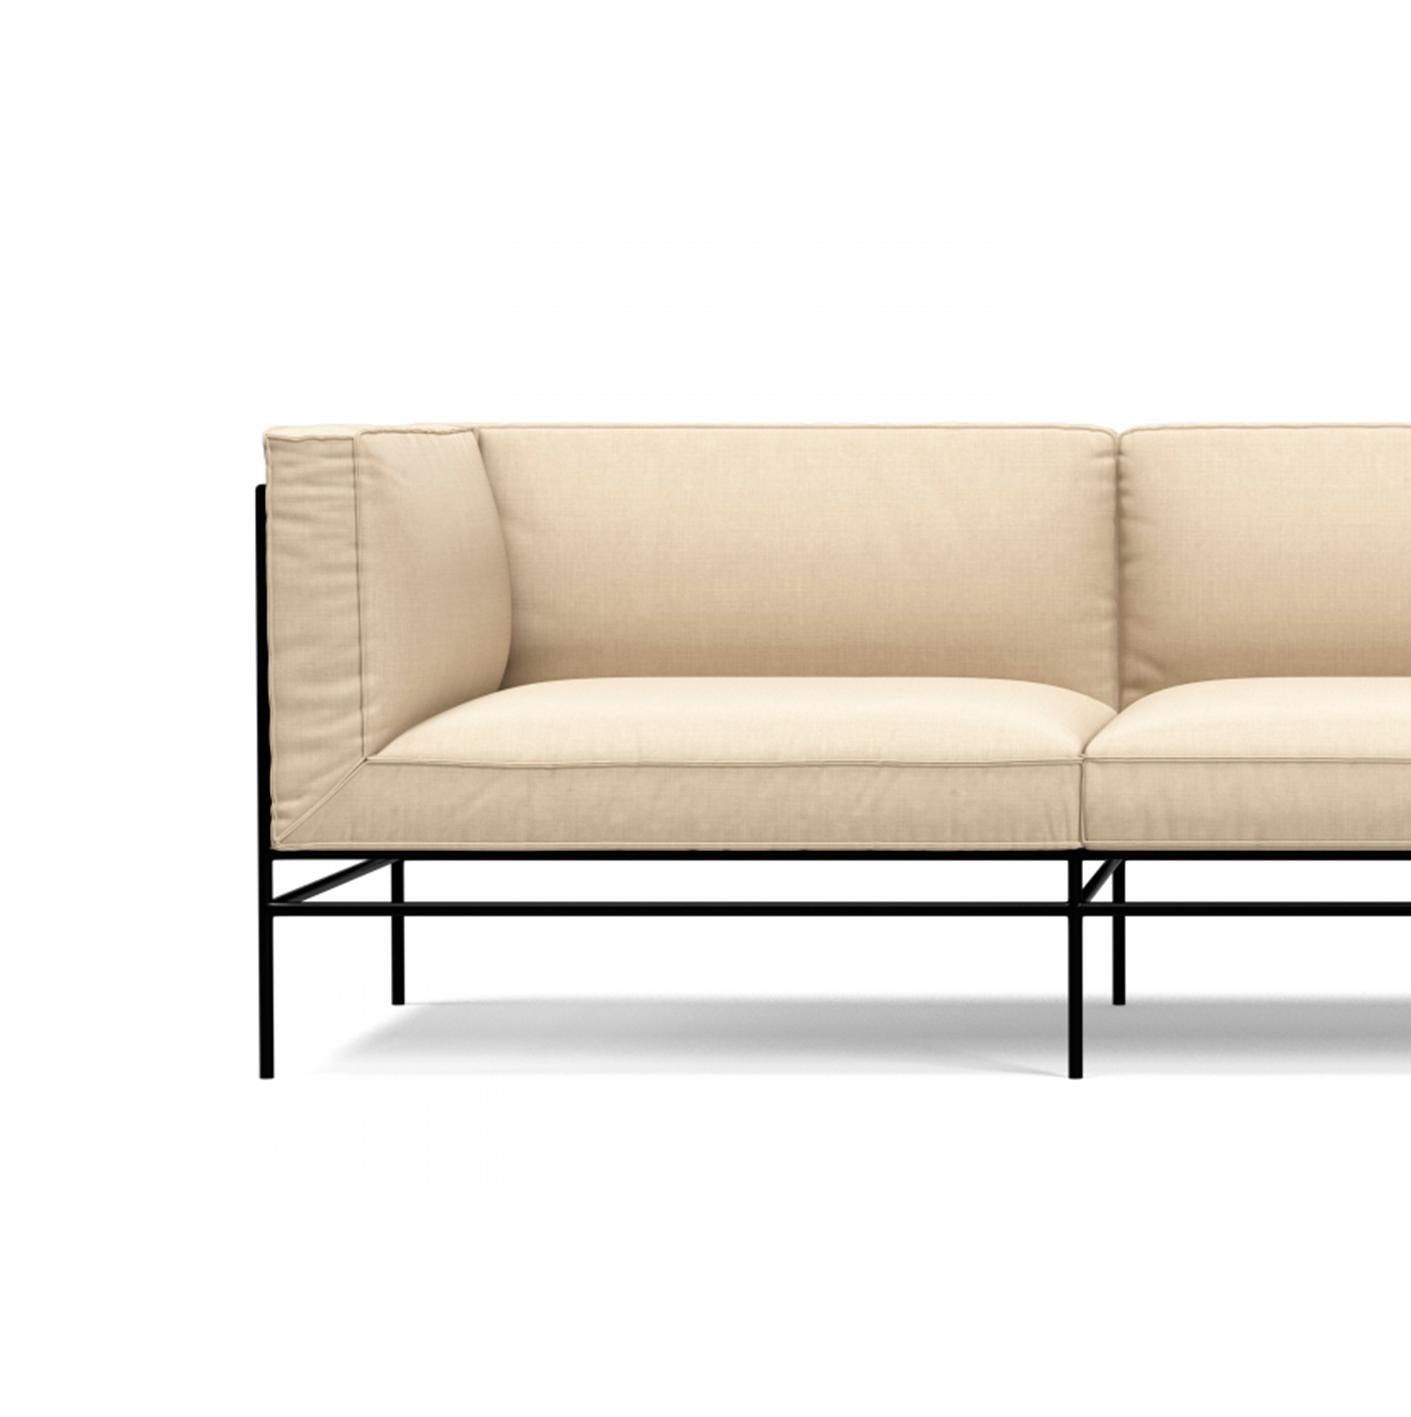  'Middleweight' Three Seater Sofa by Michael Anastassiades for Karakter

Middleweight is Michael Anastassiades’ very first upholstered piece of furniture. The piece captures the best of two worlds, the Italian super lounge sofa on one side and the